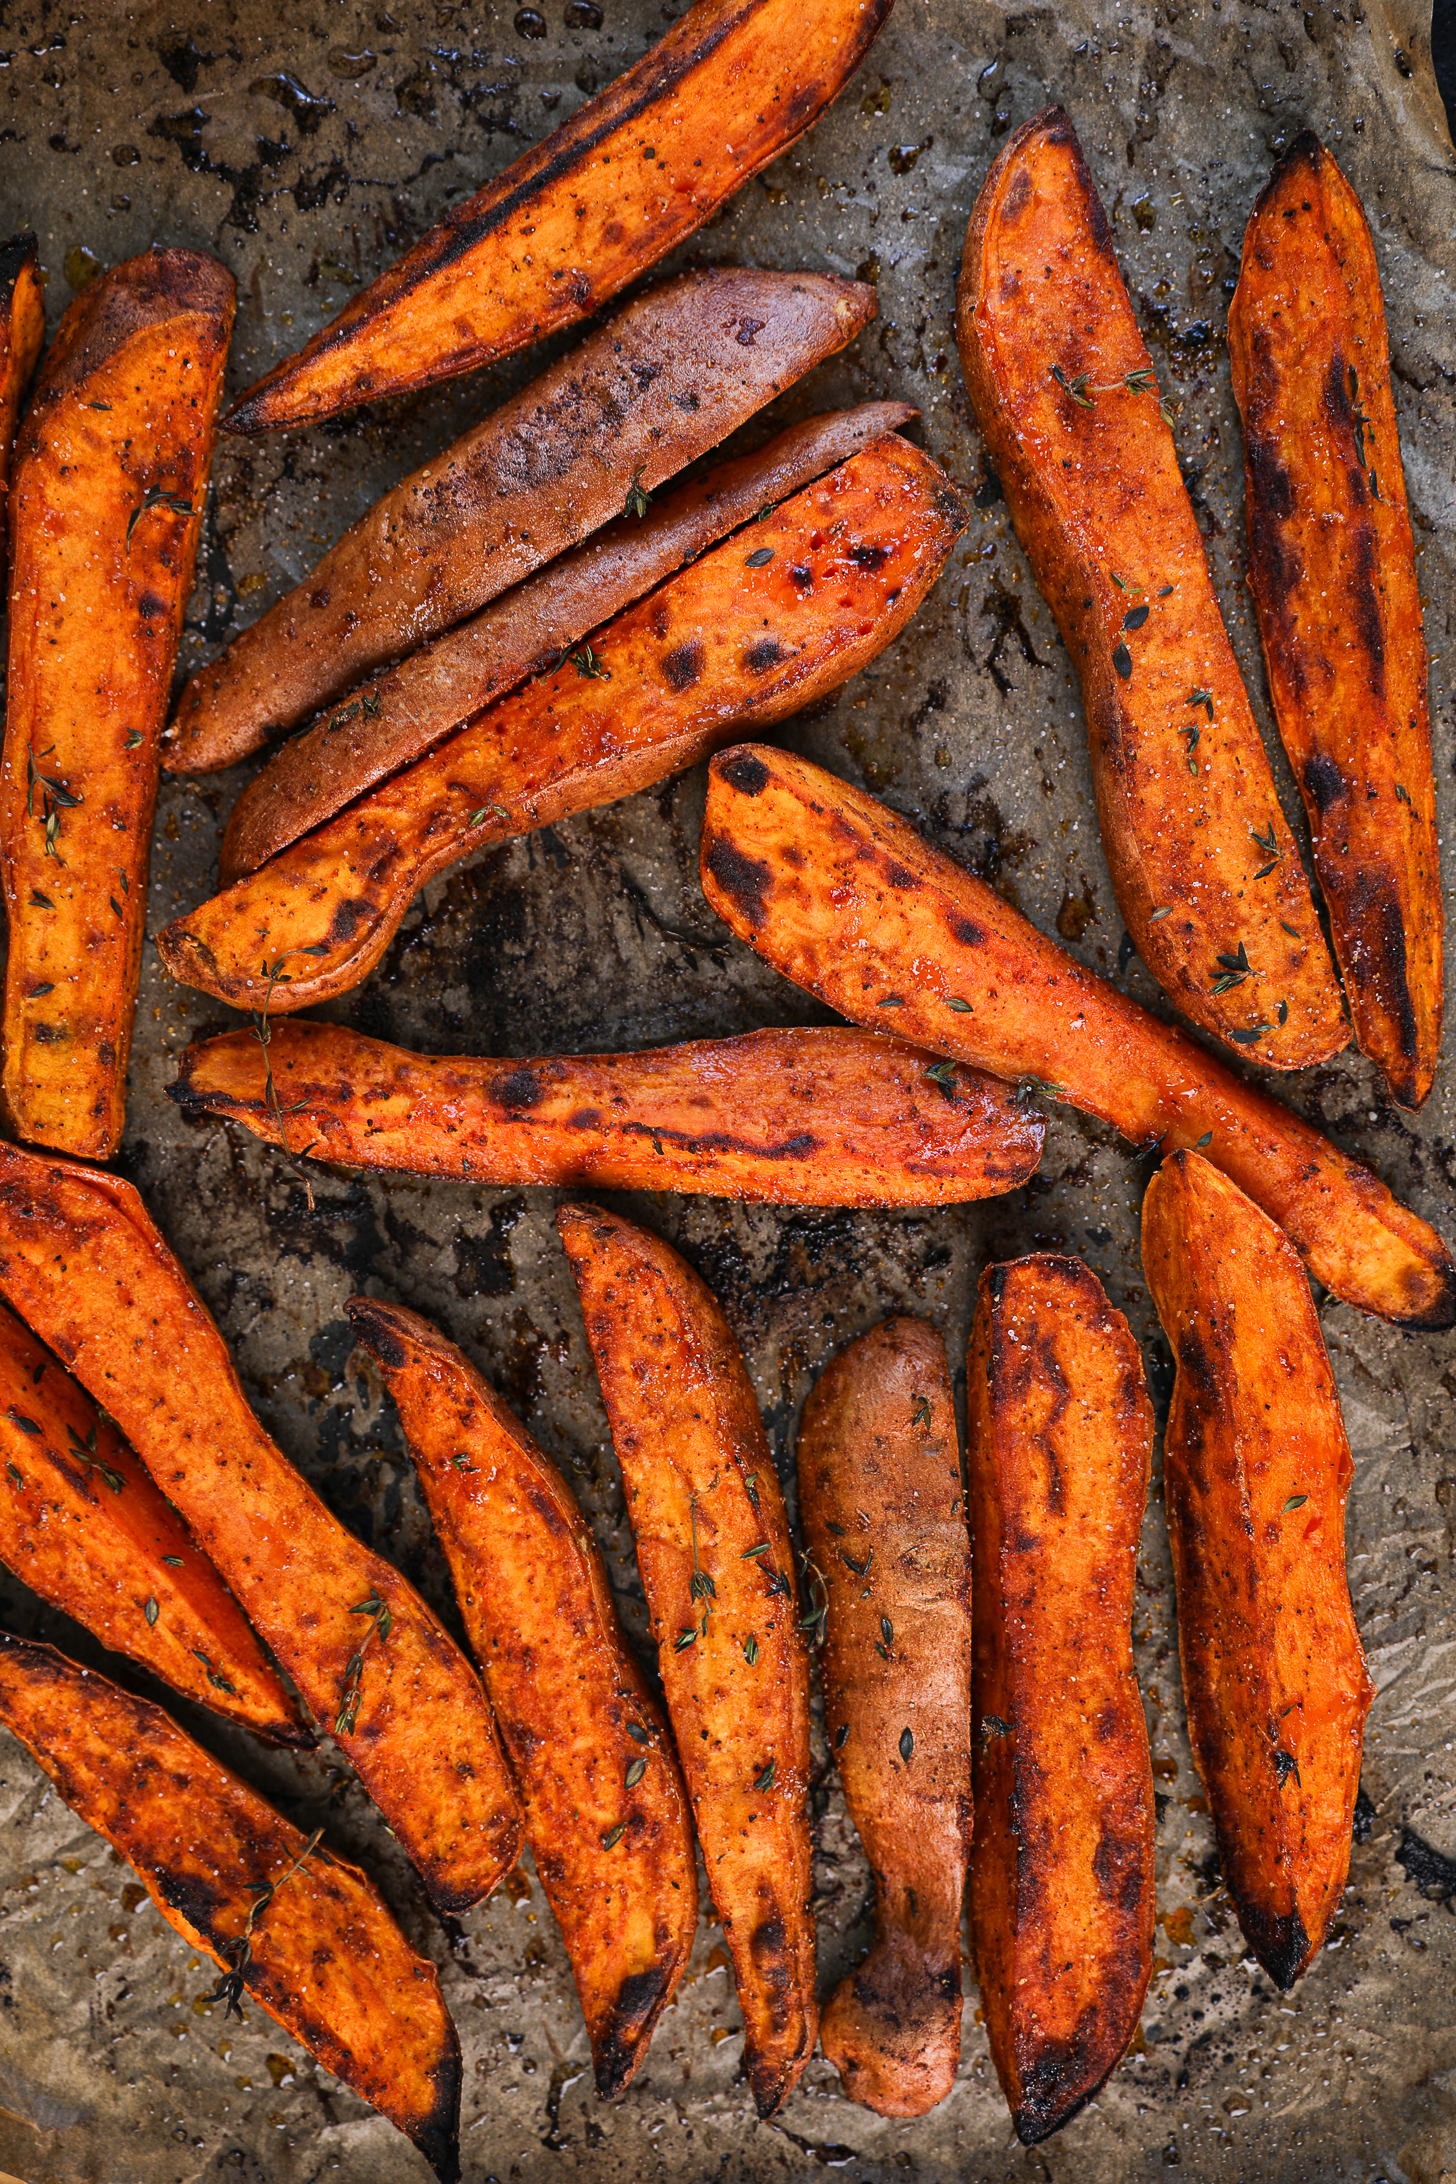 Charred roasted sweet potato wedges on a baking tray lined with parchment paper.